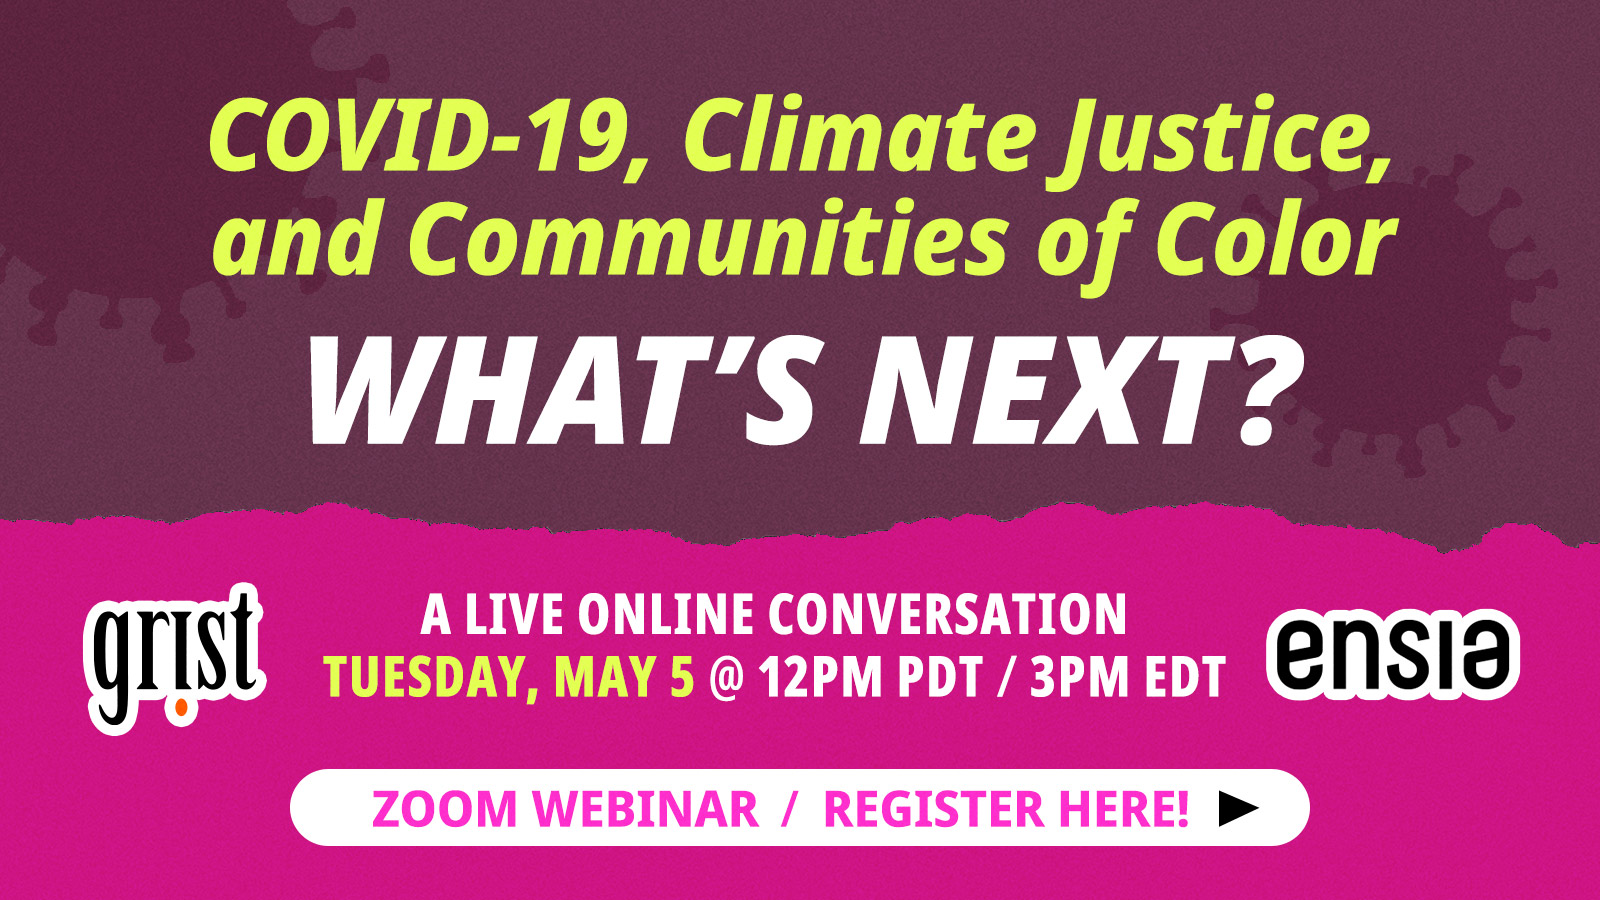 COVID-19, Climate Justice, and Communities of Color. What’s next?